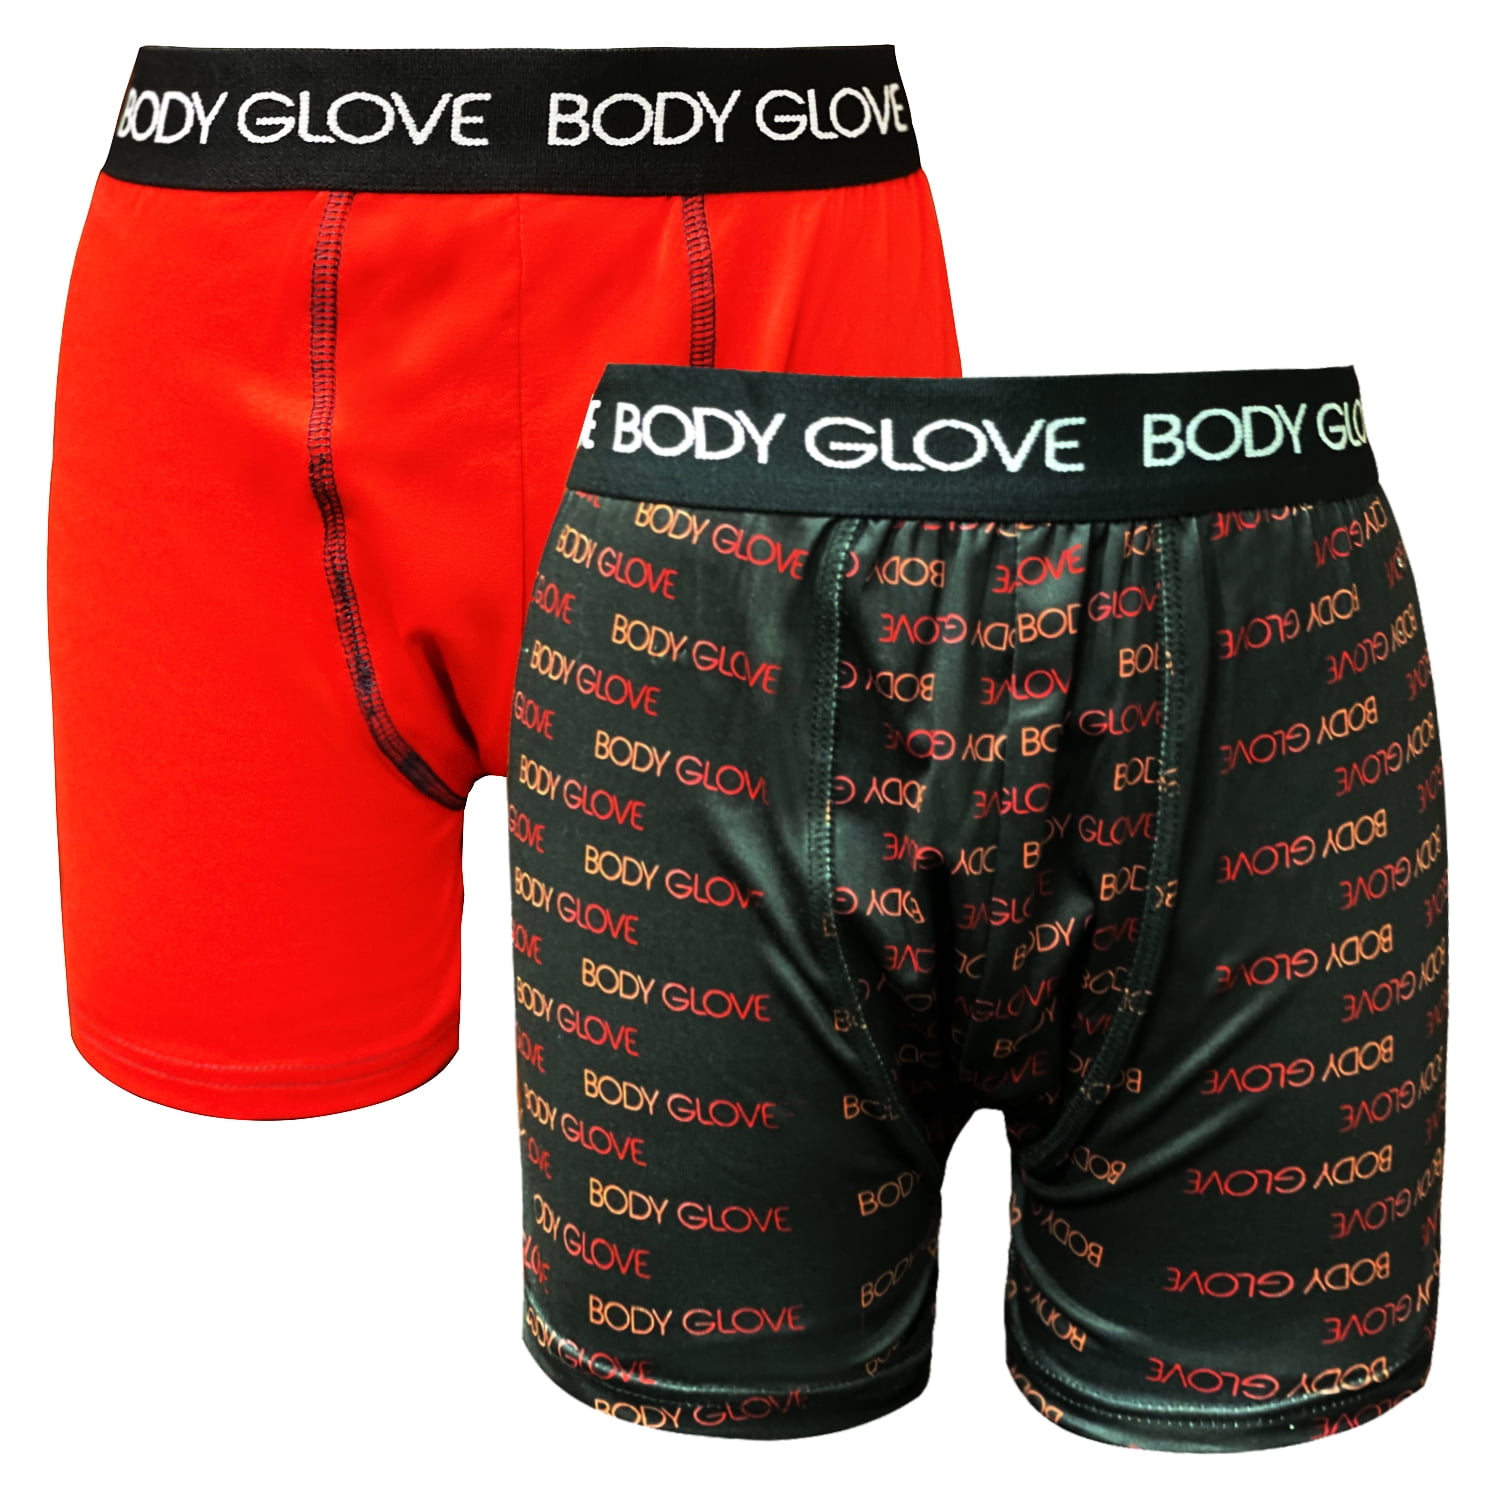 Body Glove - Body Glove Toddler & Boys Boxers Briefs, 2 Pack Size 2T-12 ...